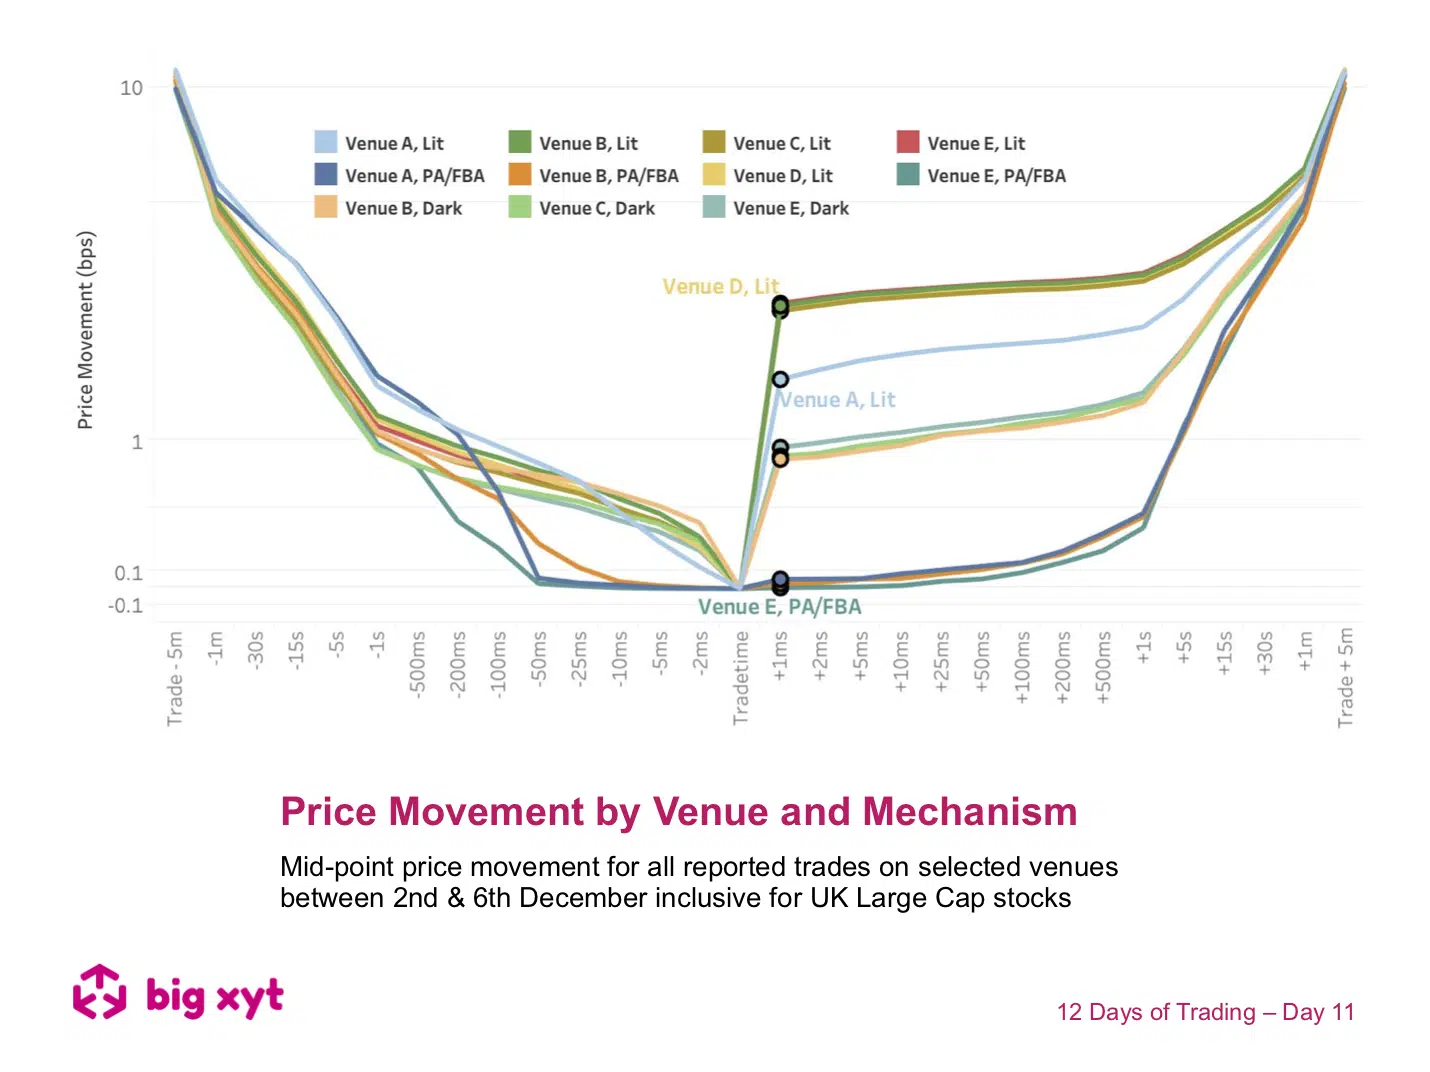 12 Days of Trading – Day 11 of 12: Price Movement by Venue and Mechanism